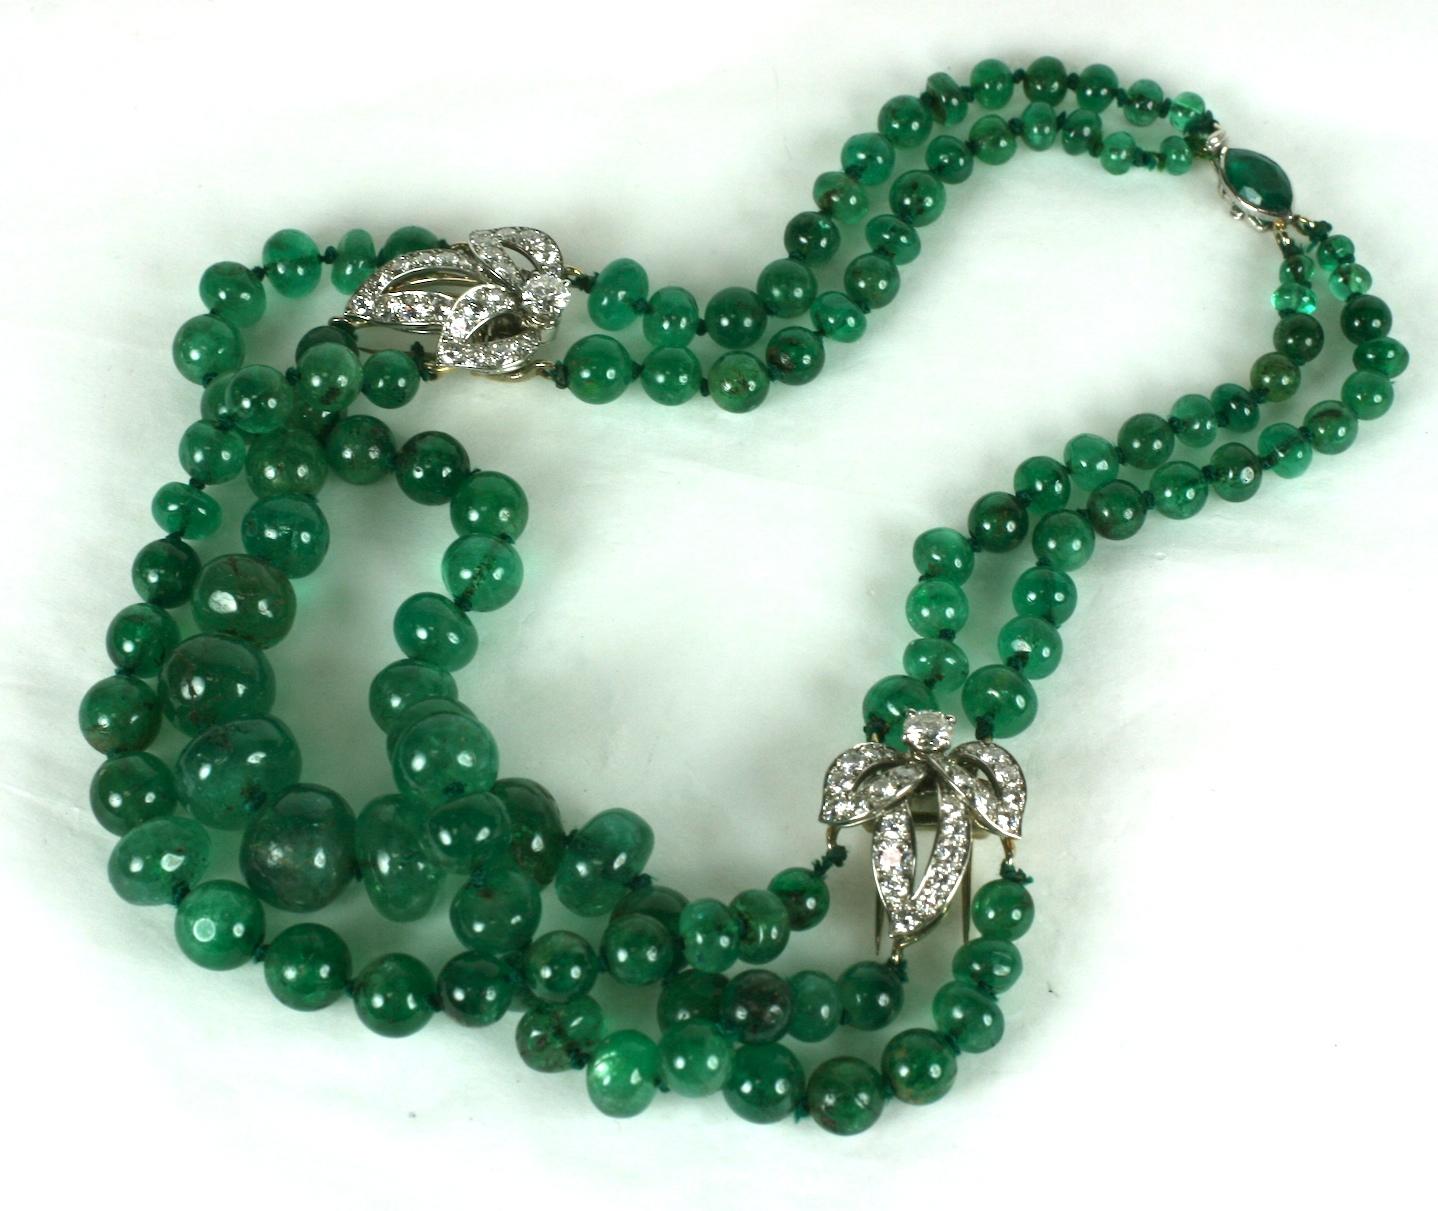 Striking Cartier, Paris Diamond Clip and Emerald Bead Necklace from the 1950's. A pair of detachable leaf form clips are the stations to which the graduated emerald beads are strung. A lovely marquise shaped 1 carat Columbian emerald forms the clasp